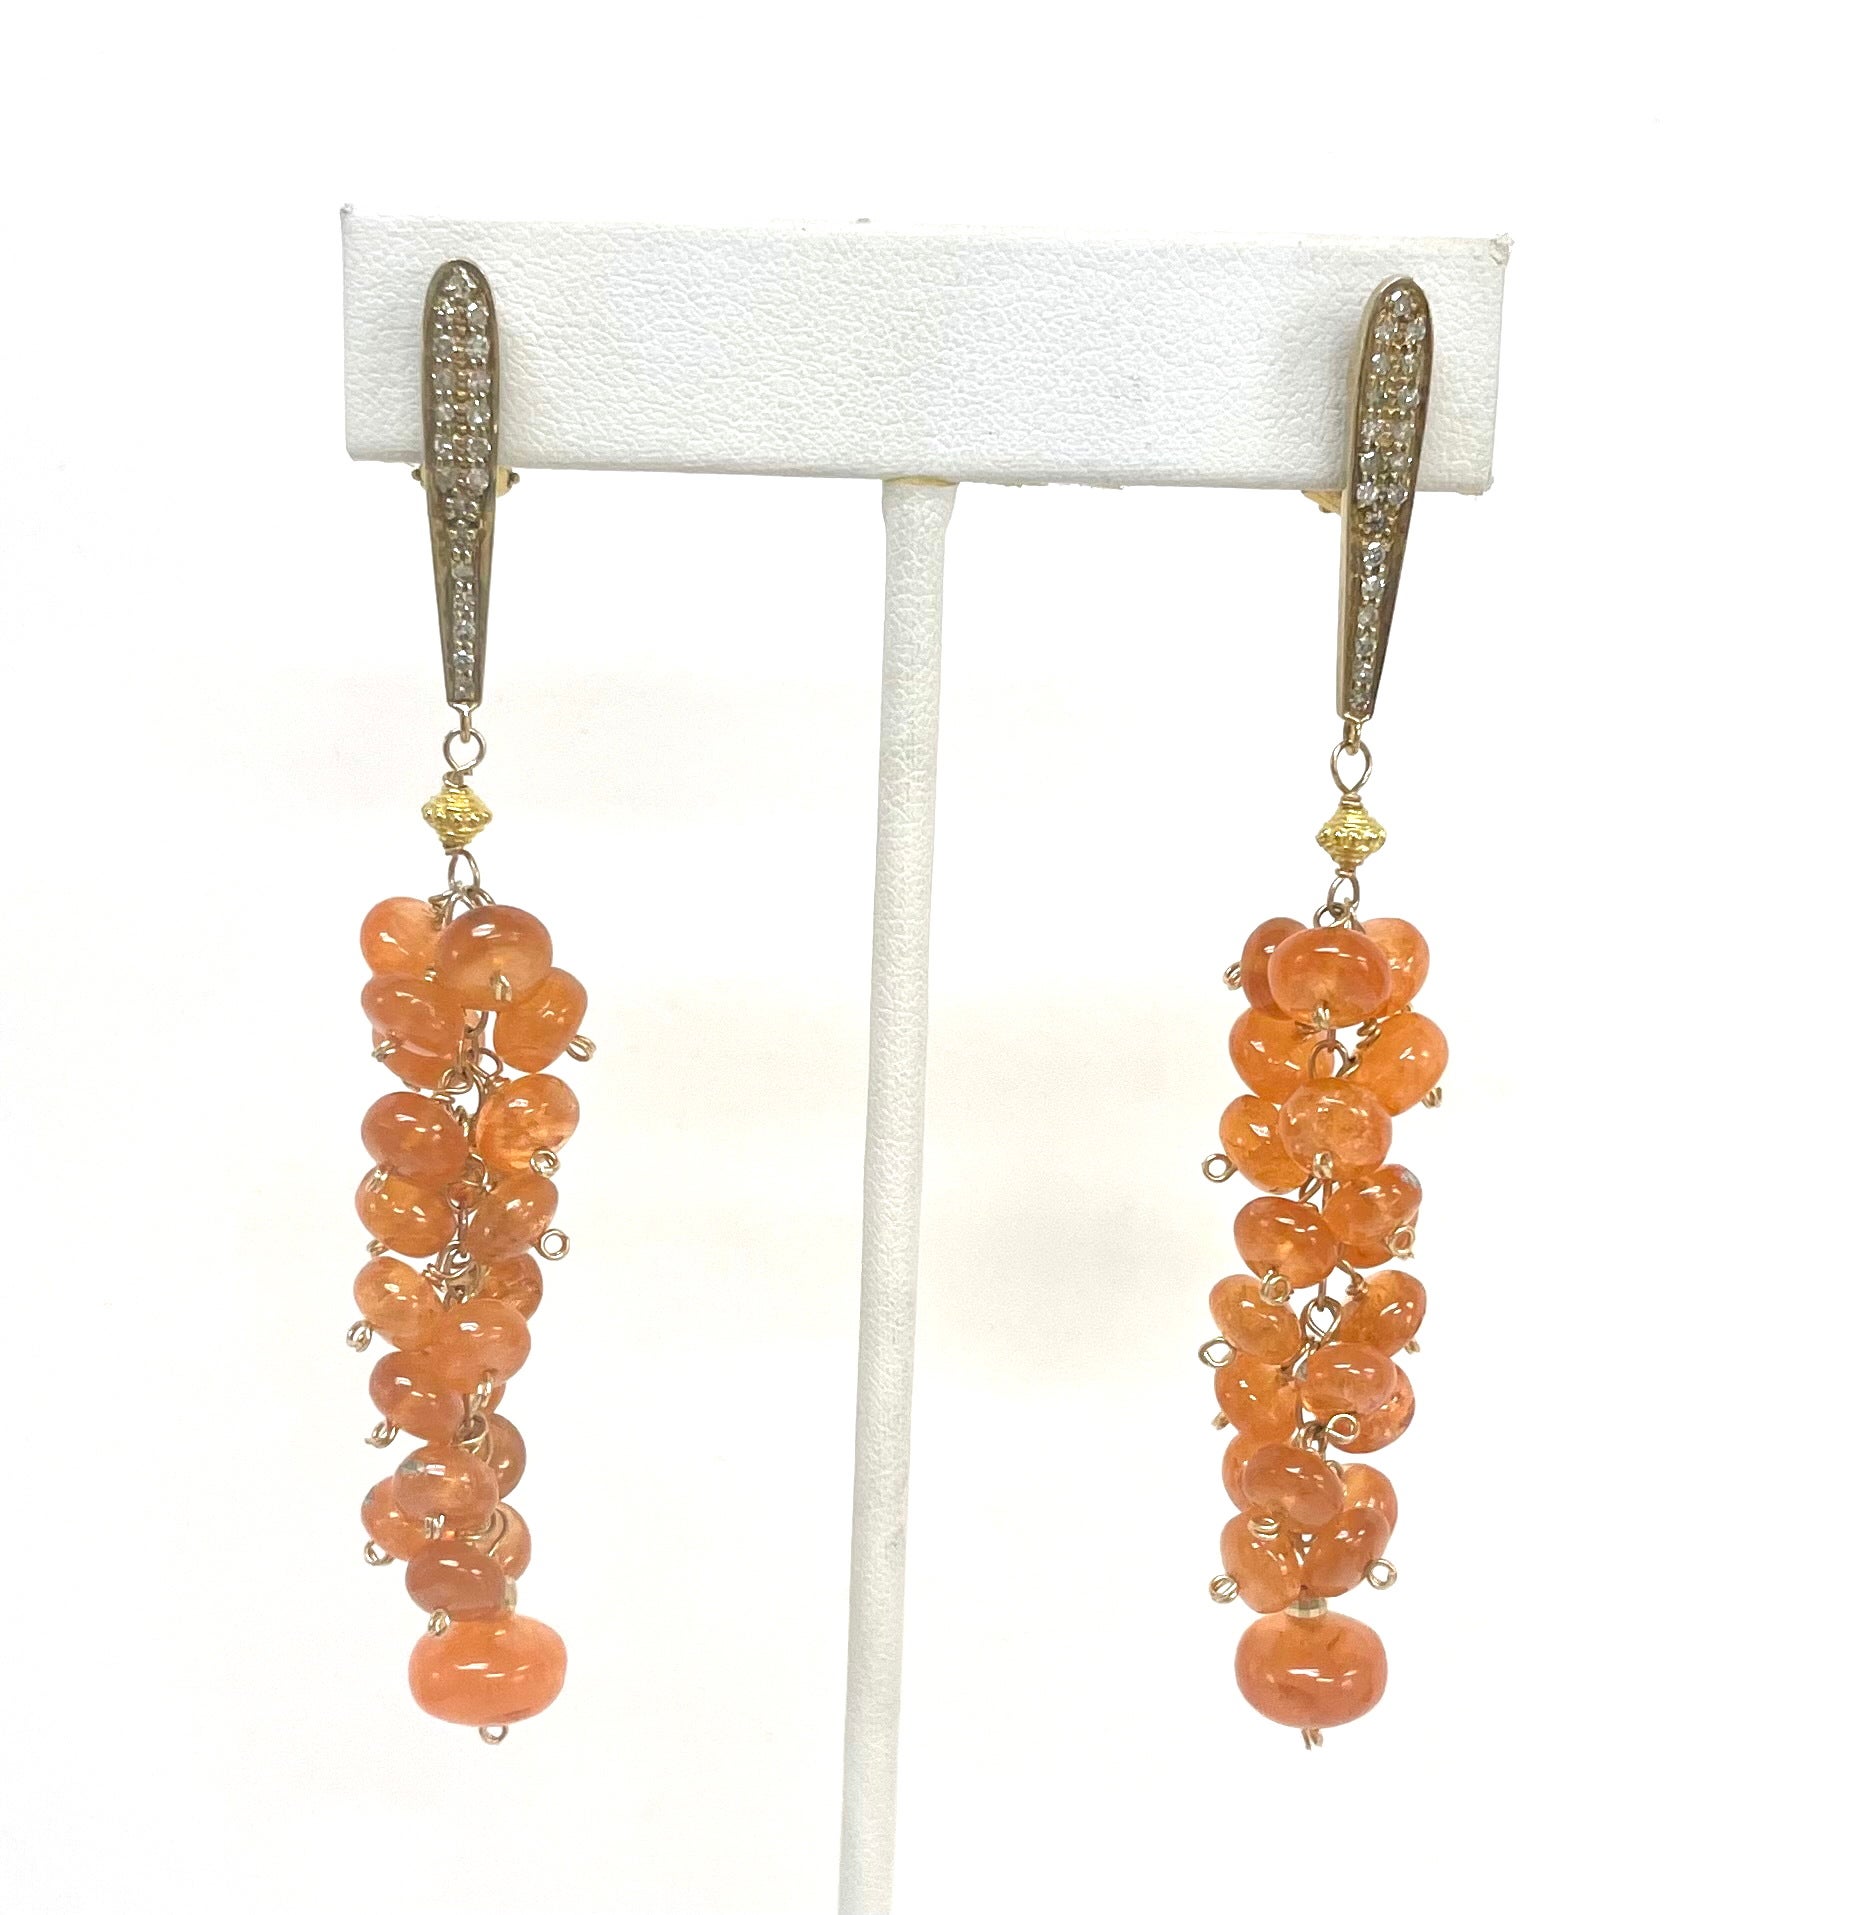 92 Carats Orange Spessartite with Gold and Diamonds Cluster Earrings For Sale 2